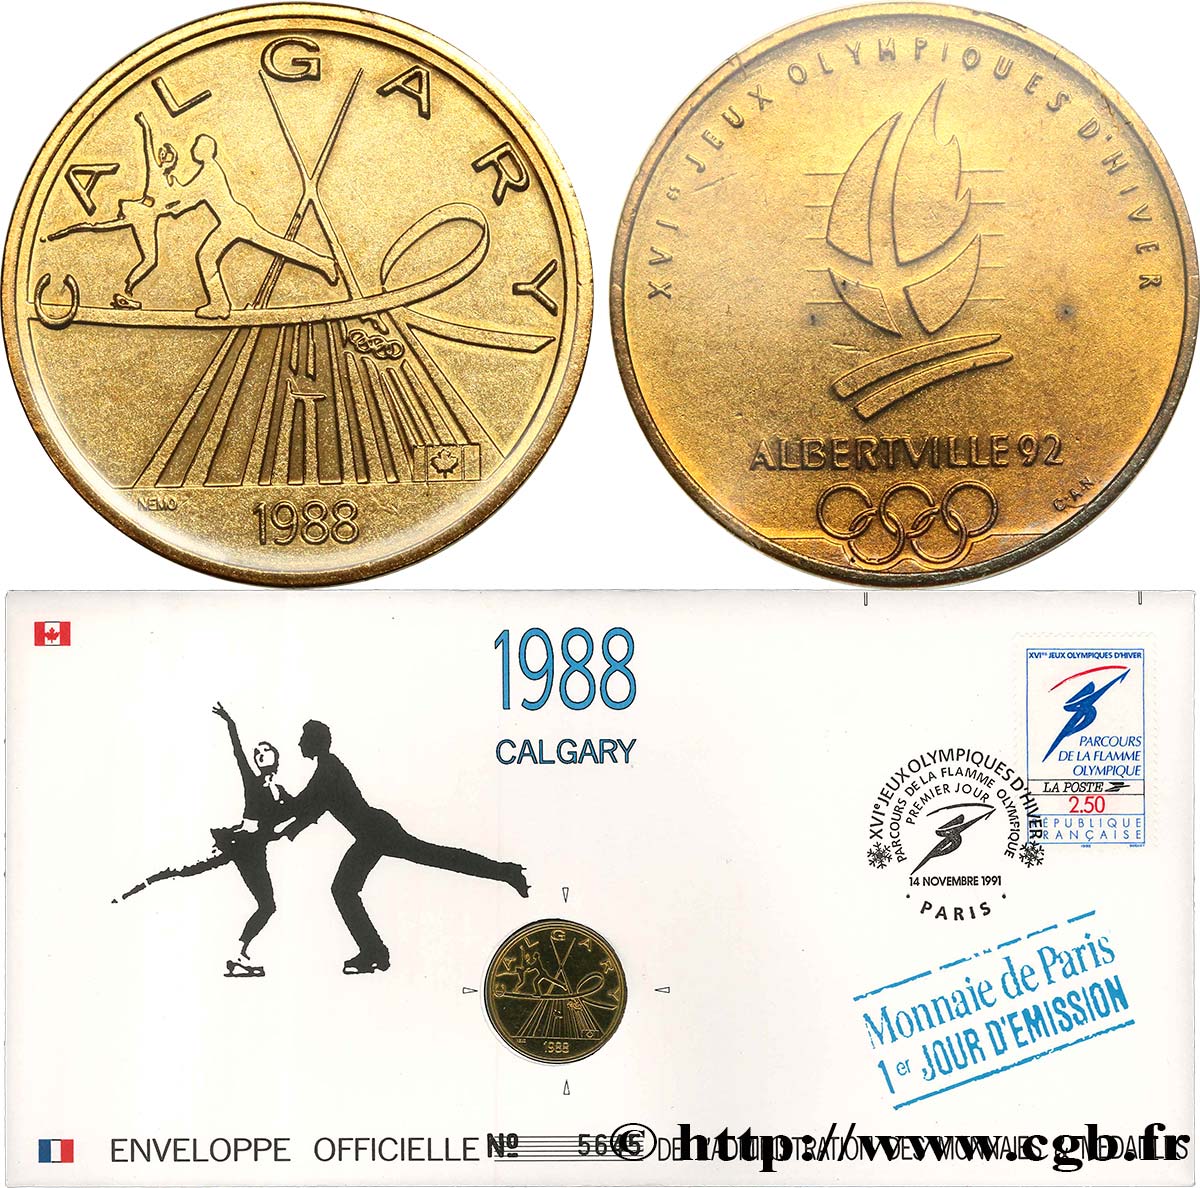 SPORTS Enveloppe “Timbre médaille” n°18 MS